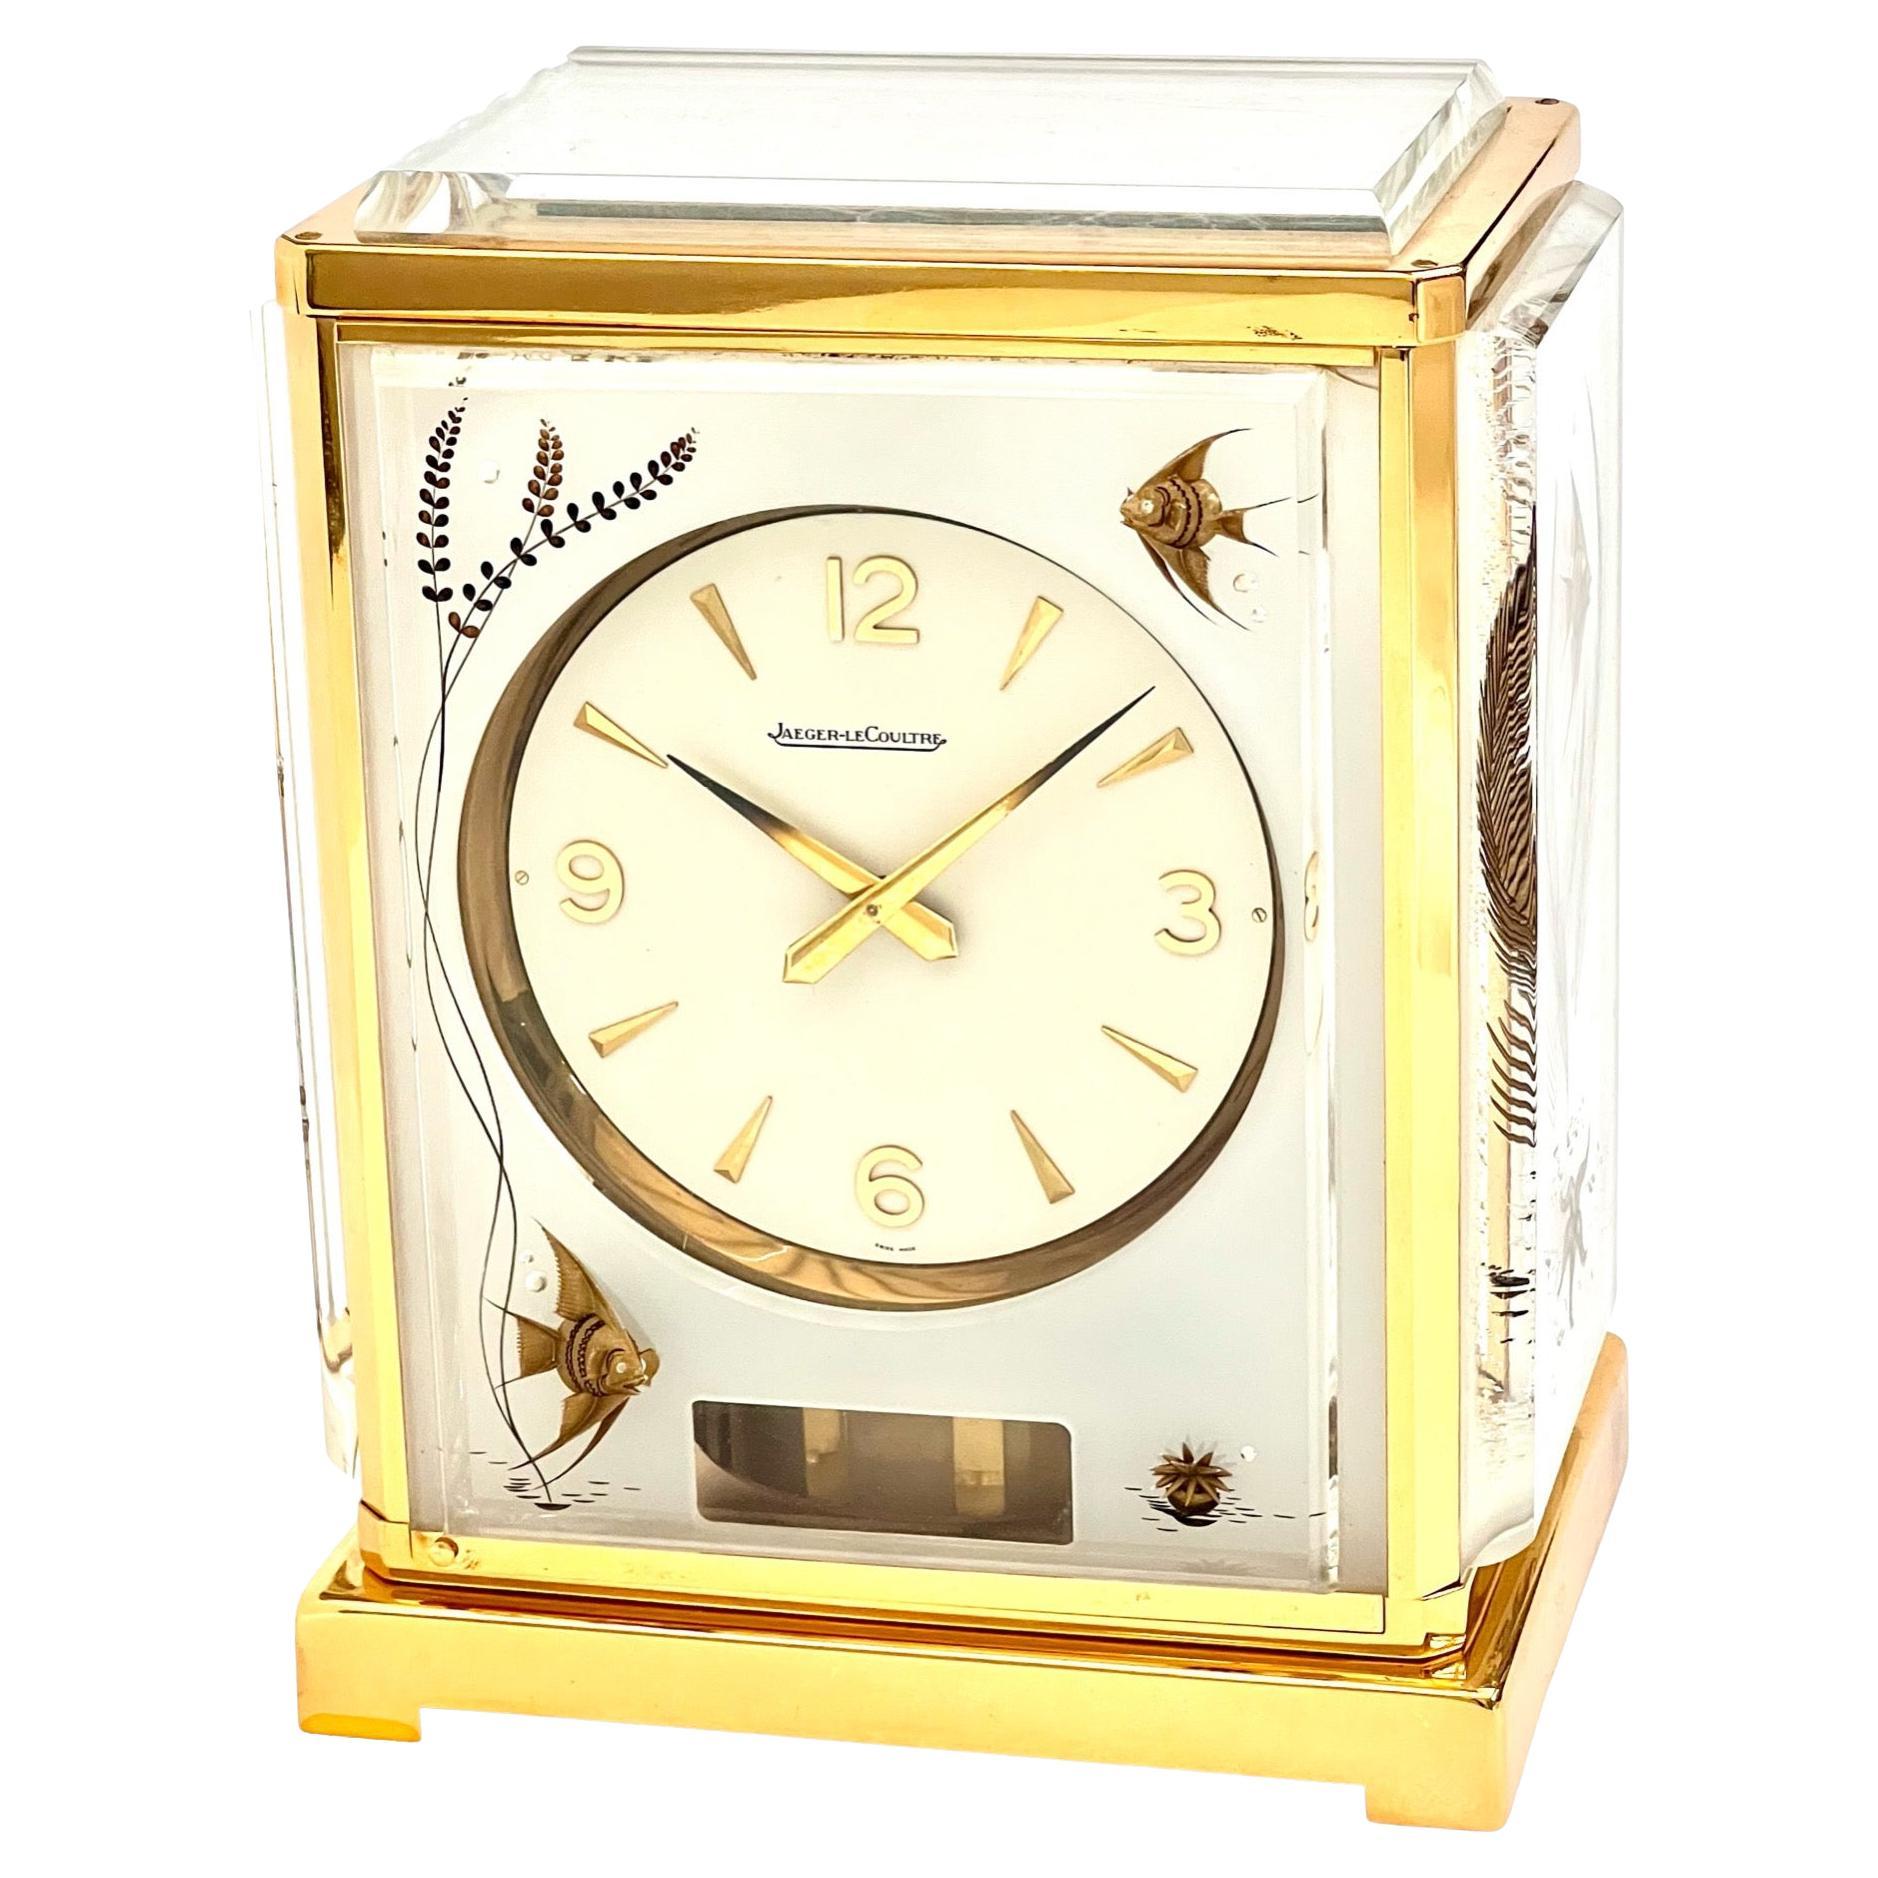 Jaeger LeCoultre Mid-Century Marina Poissons Brass and Glass Atmos Clock